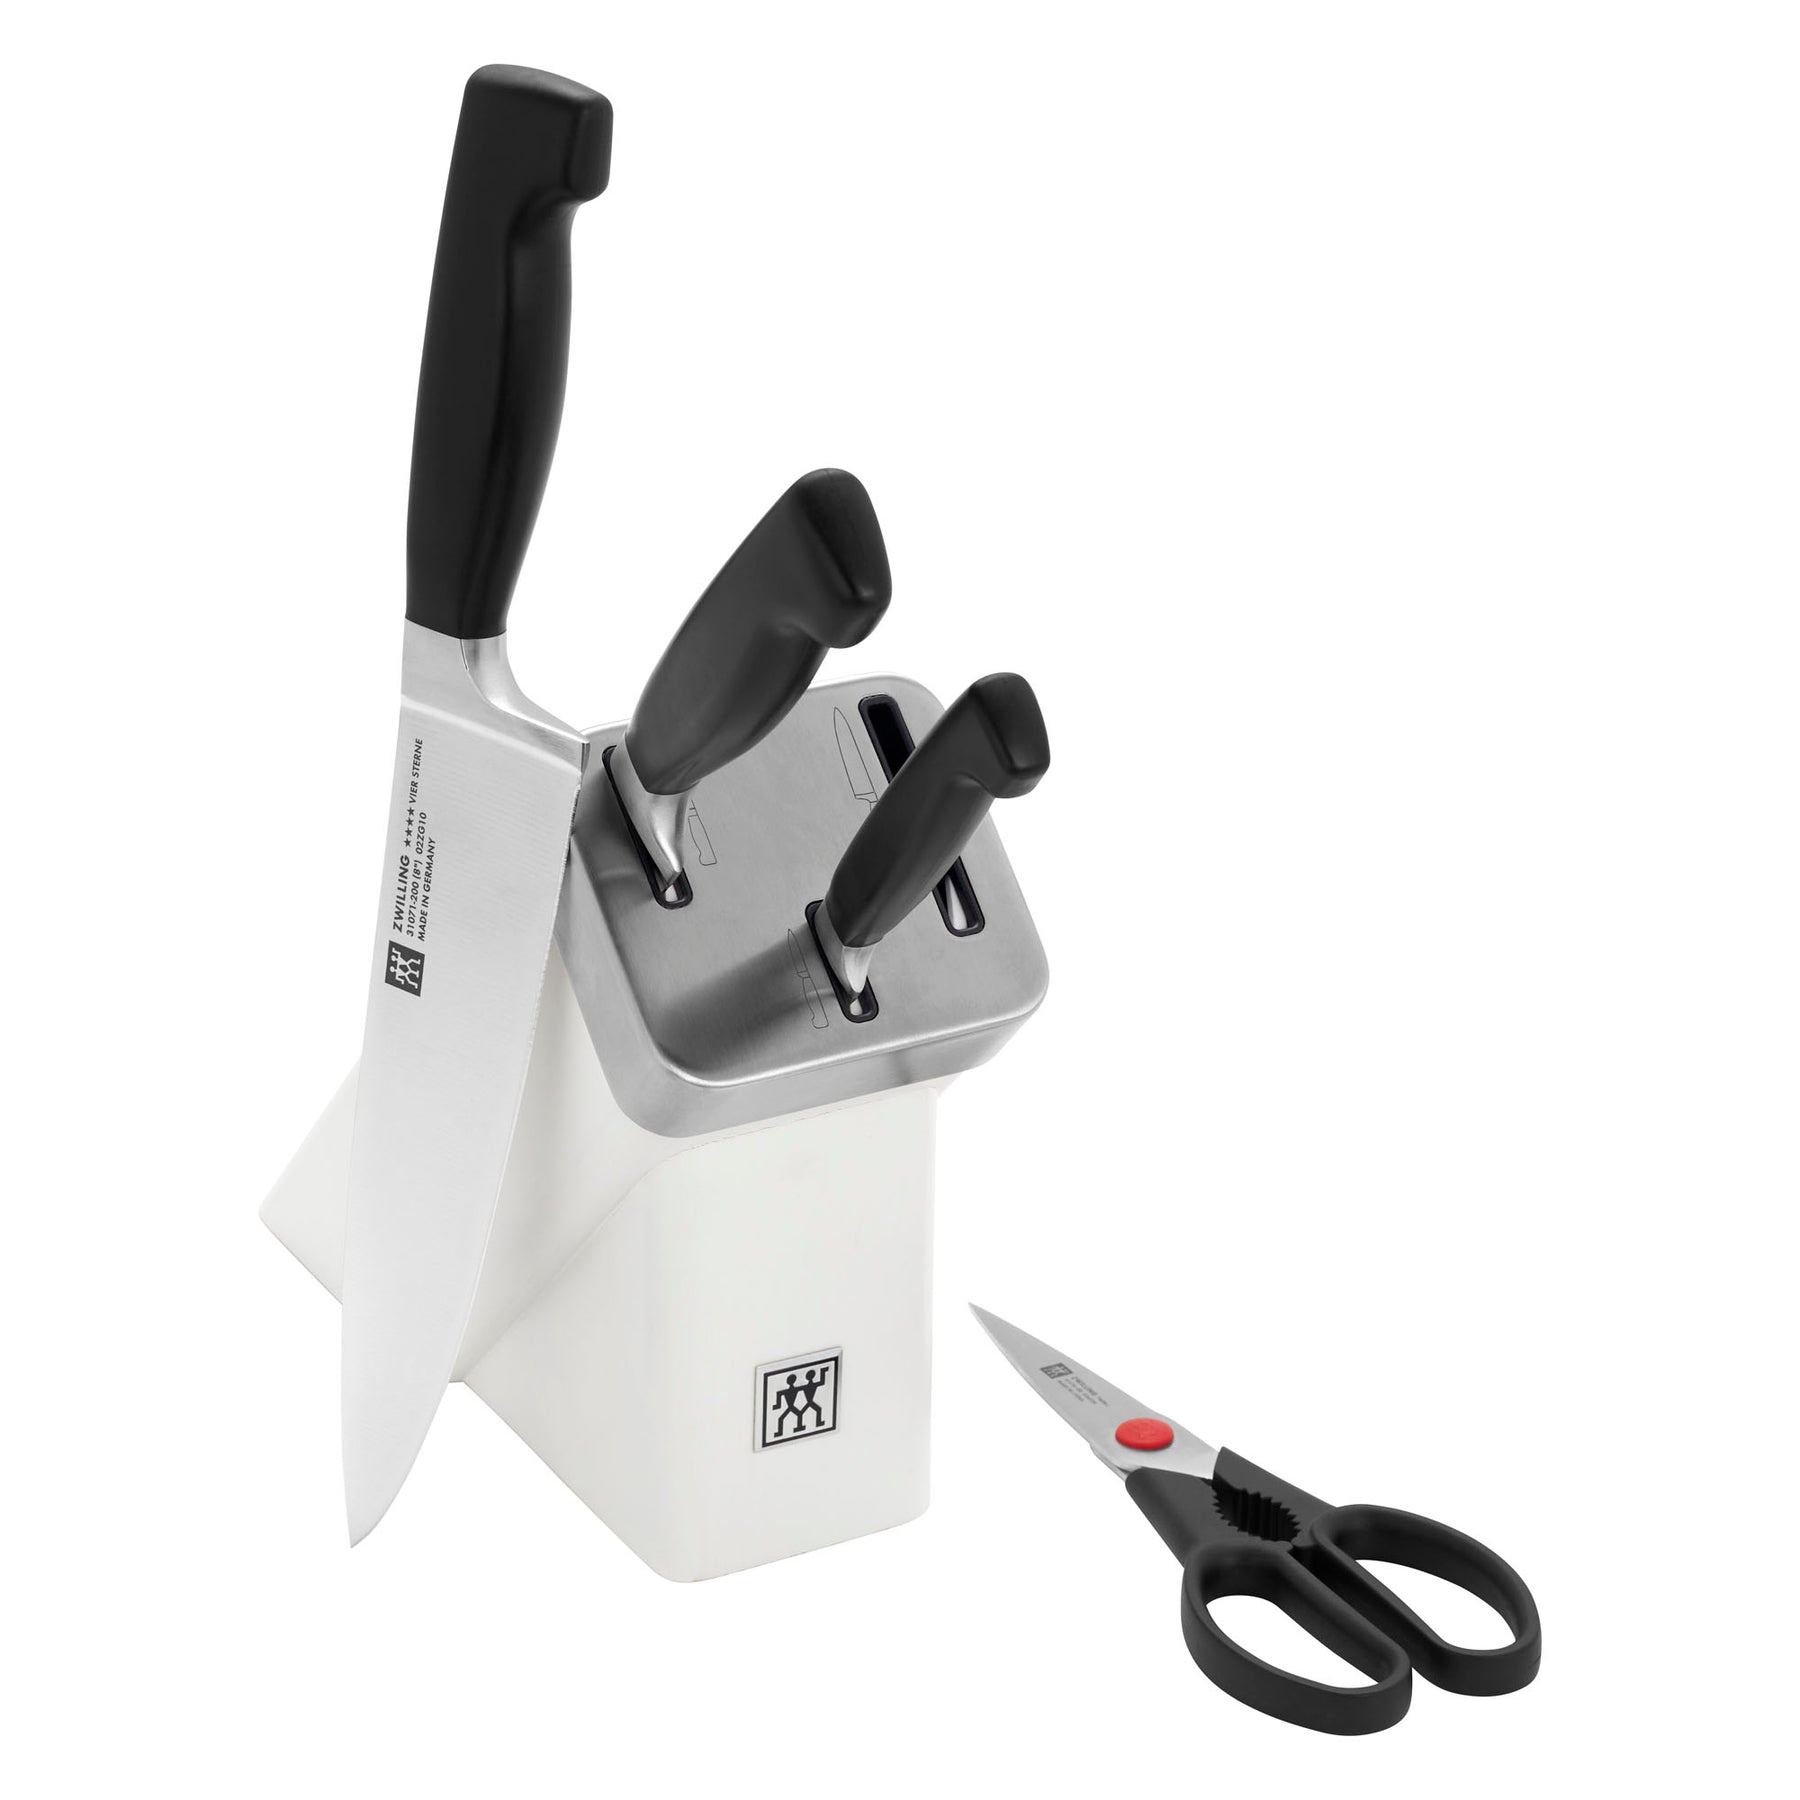 ZWILLING Four Star 5-pc Compact Self-Sharpening Knife Block Set - Black